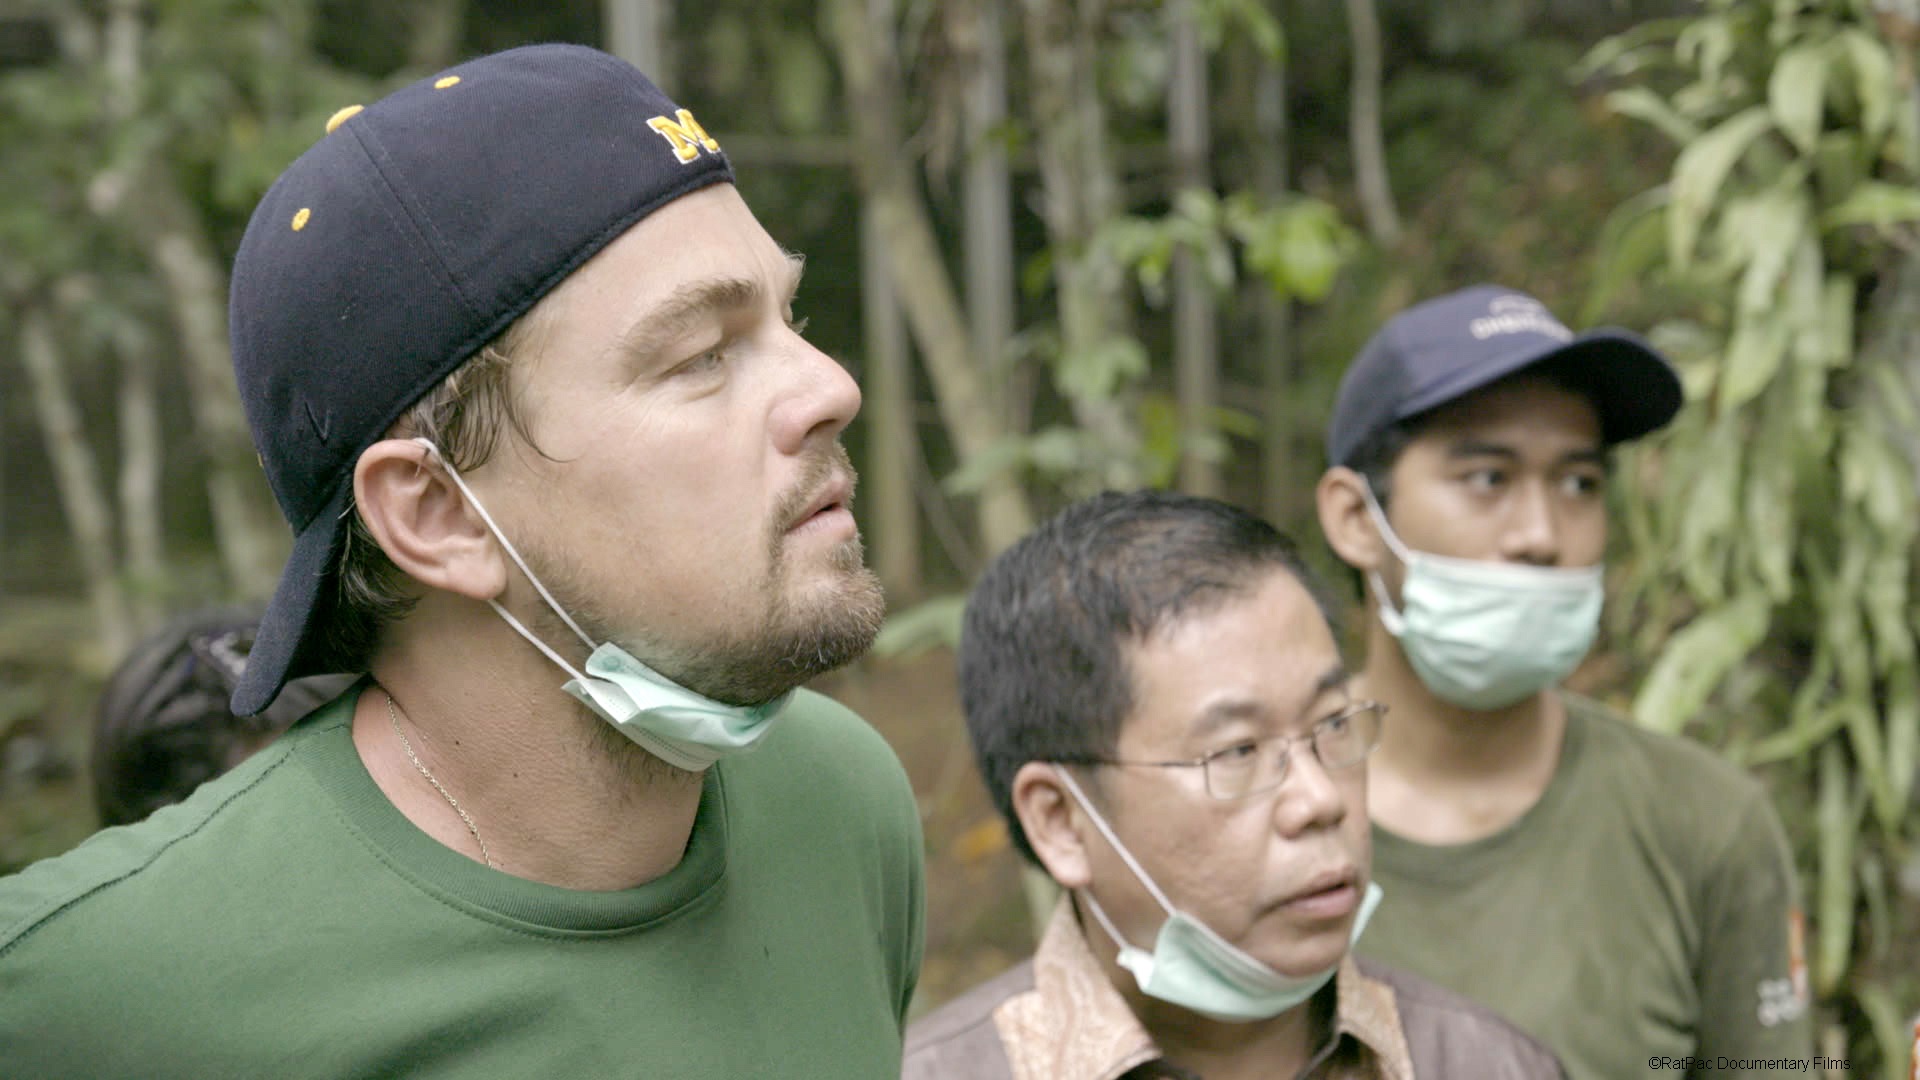 INDONESIA- Leonardo with Orangutans in the Leuser Ecosystem. For two years, Leonardo DiCaprio has criss-crossed the planet in his role as UN messenger of Peace on Climate Change. This film, executive produced by Brett Ratner and Martin Scorsese, follows that journey to find both the crisis points and the solutions to this existential threat to human species. © 2016 RatPac Documentary Films, LLC and Greenhour Corporation, Inc. All rights reserved.